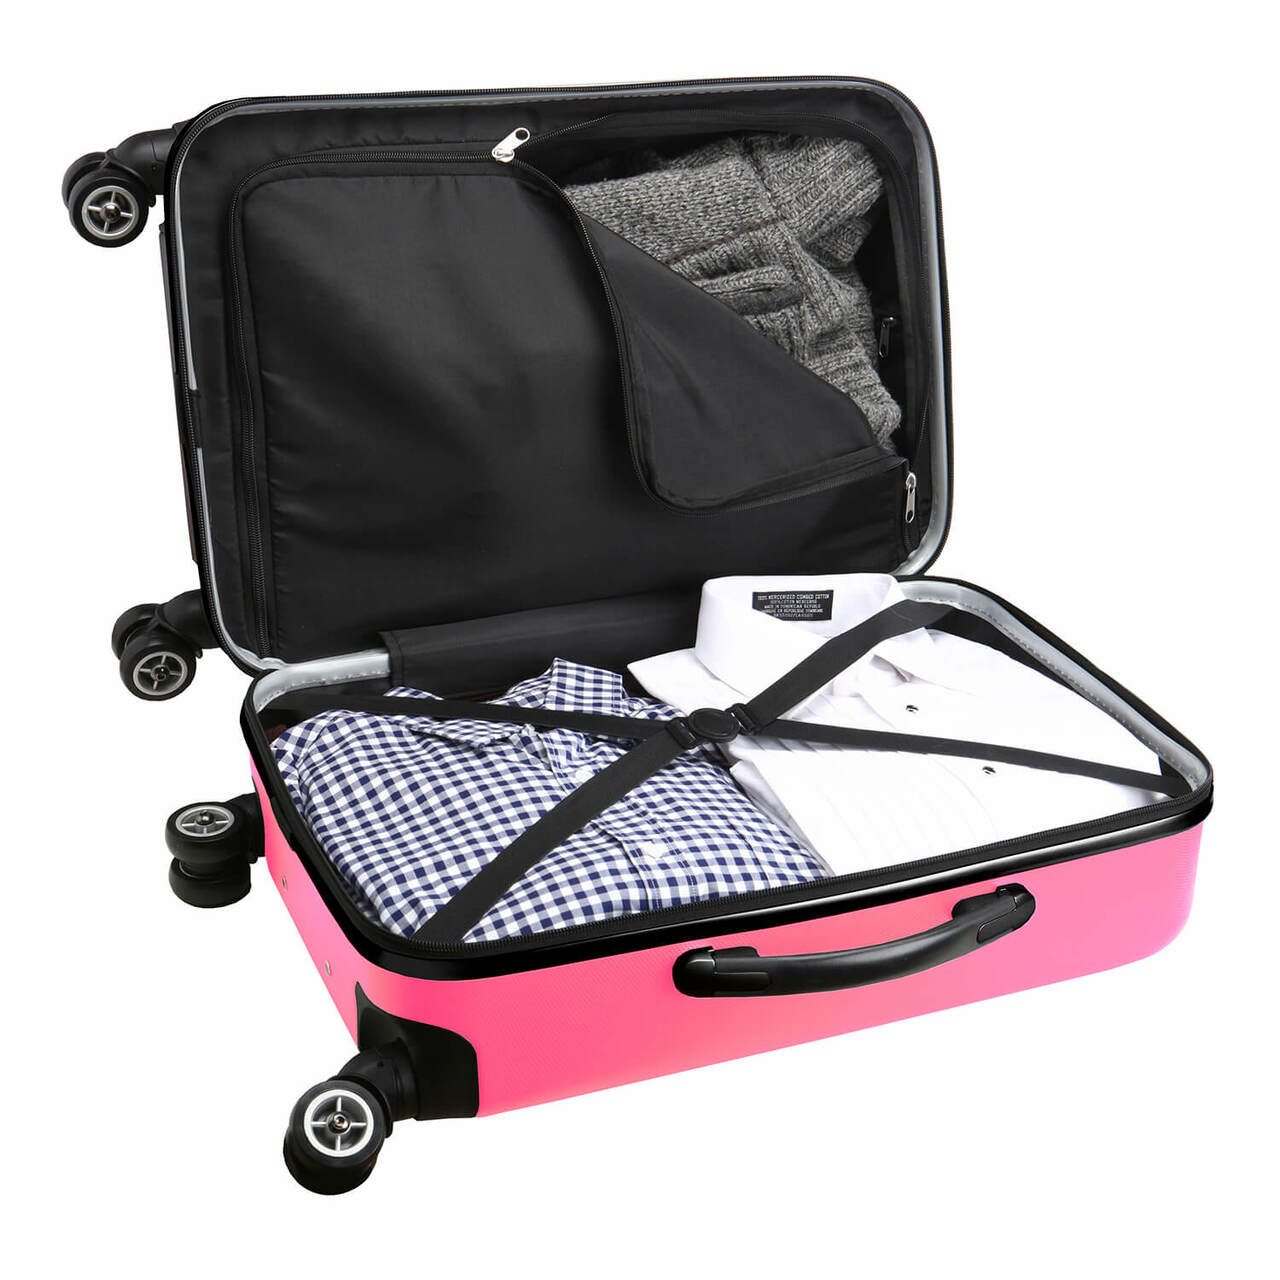 Stanford Cardinal 20" Pink Domestic Carry-on Spinner